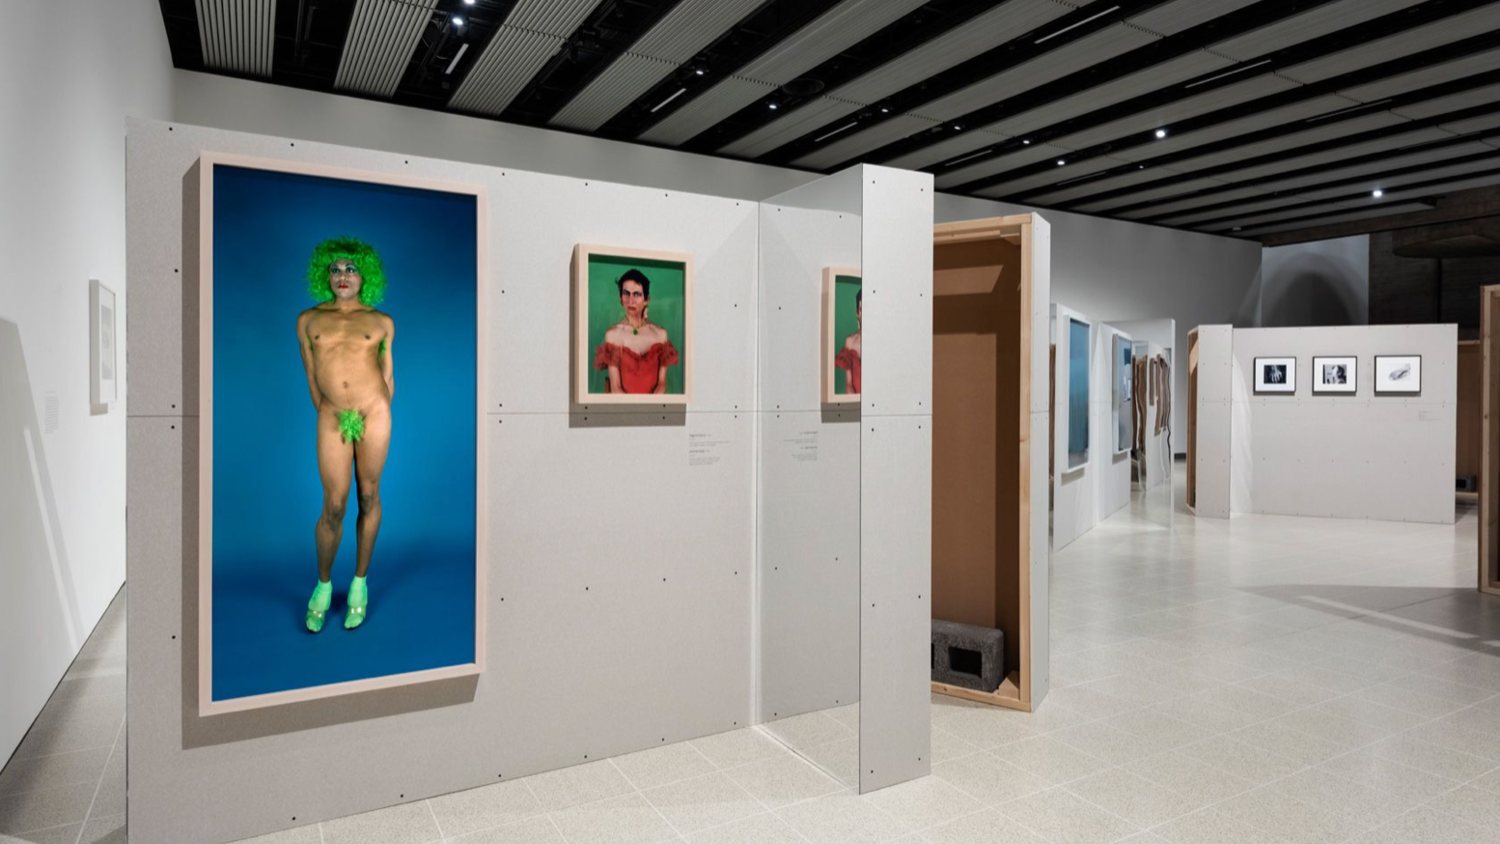 Installation view of Catherine Opie exhibition with photograph of nude man in green wig